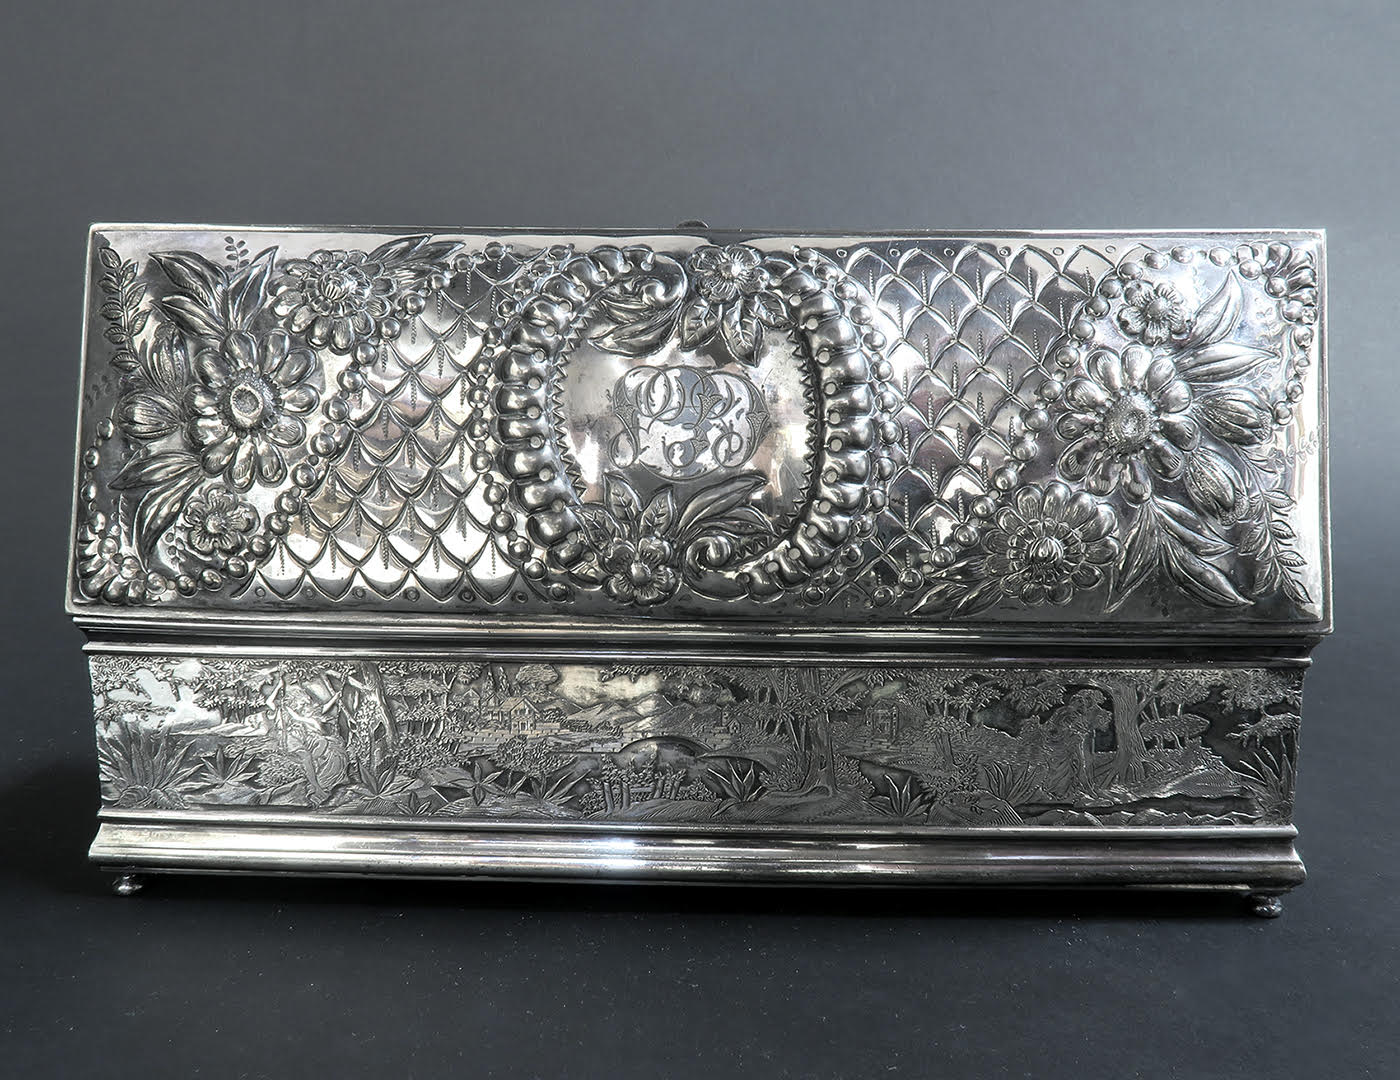 Fine 19th C. Silver-Plated Jewelry Box - Image 10 of 14